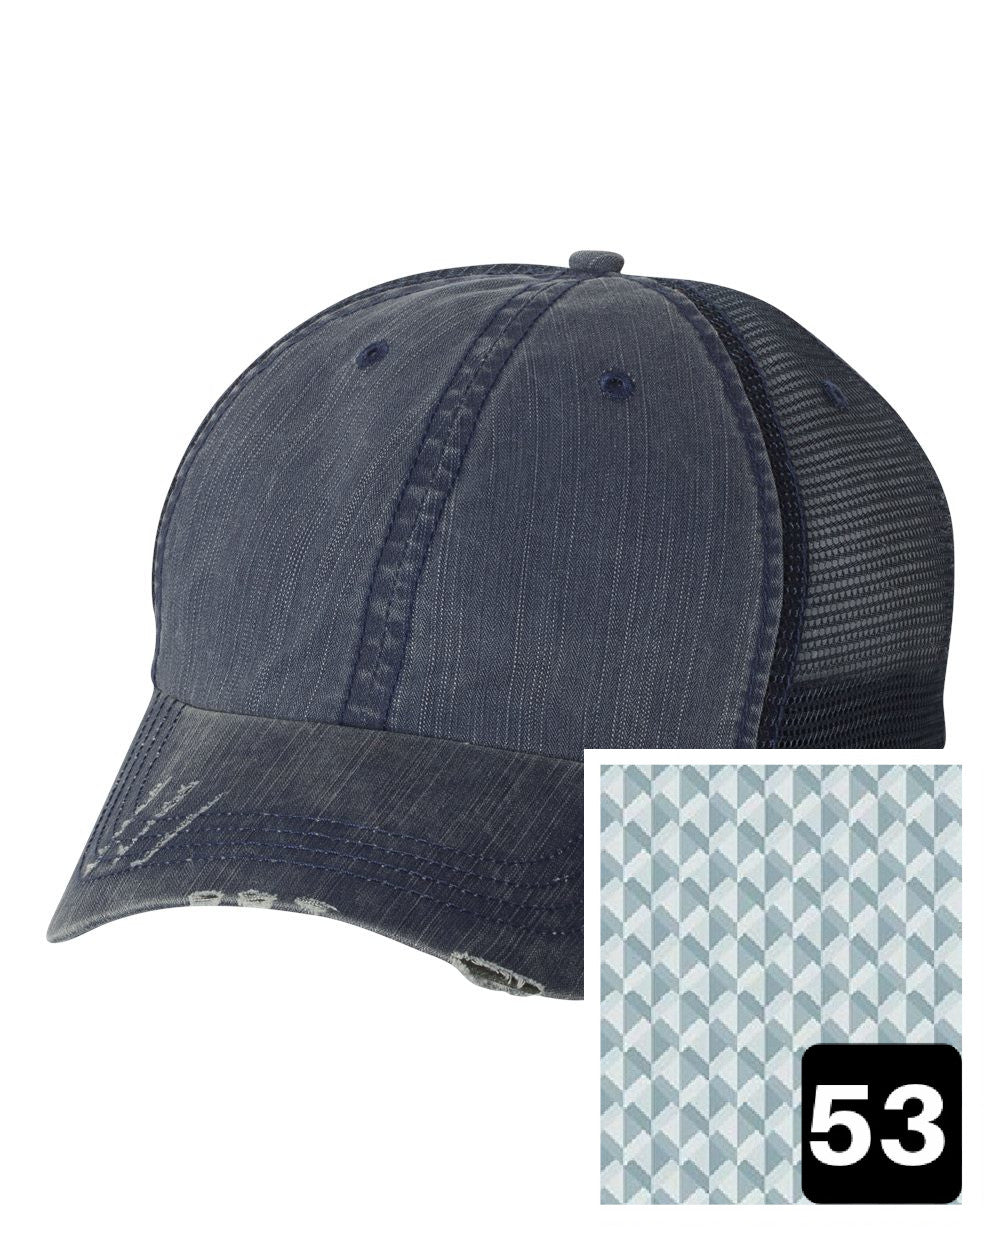 Kentucky Hat | Navy Distressed Trucker Cap | Many Fabric Choices